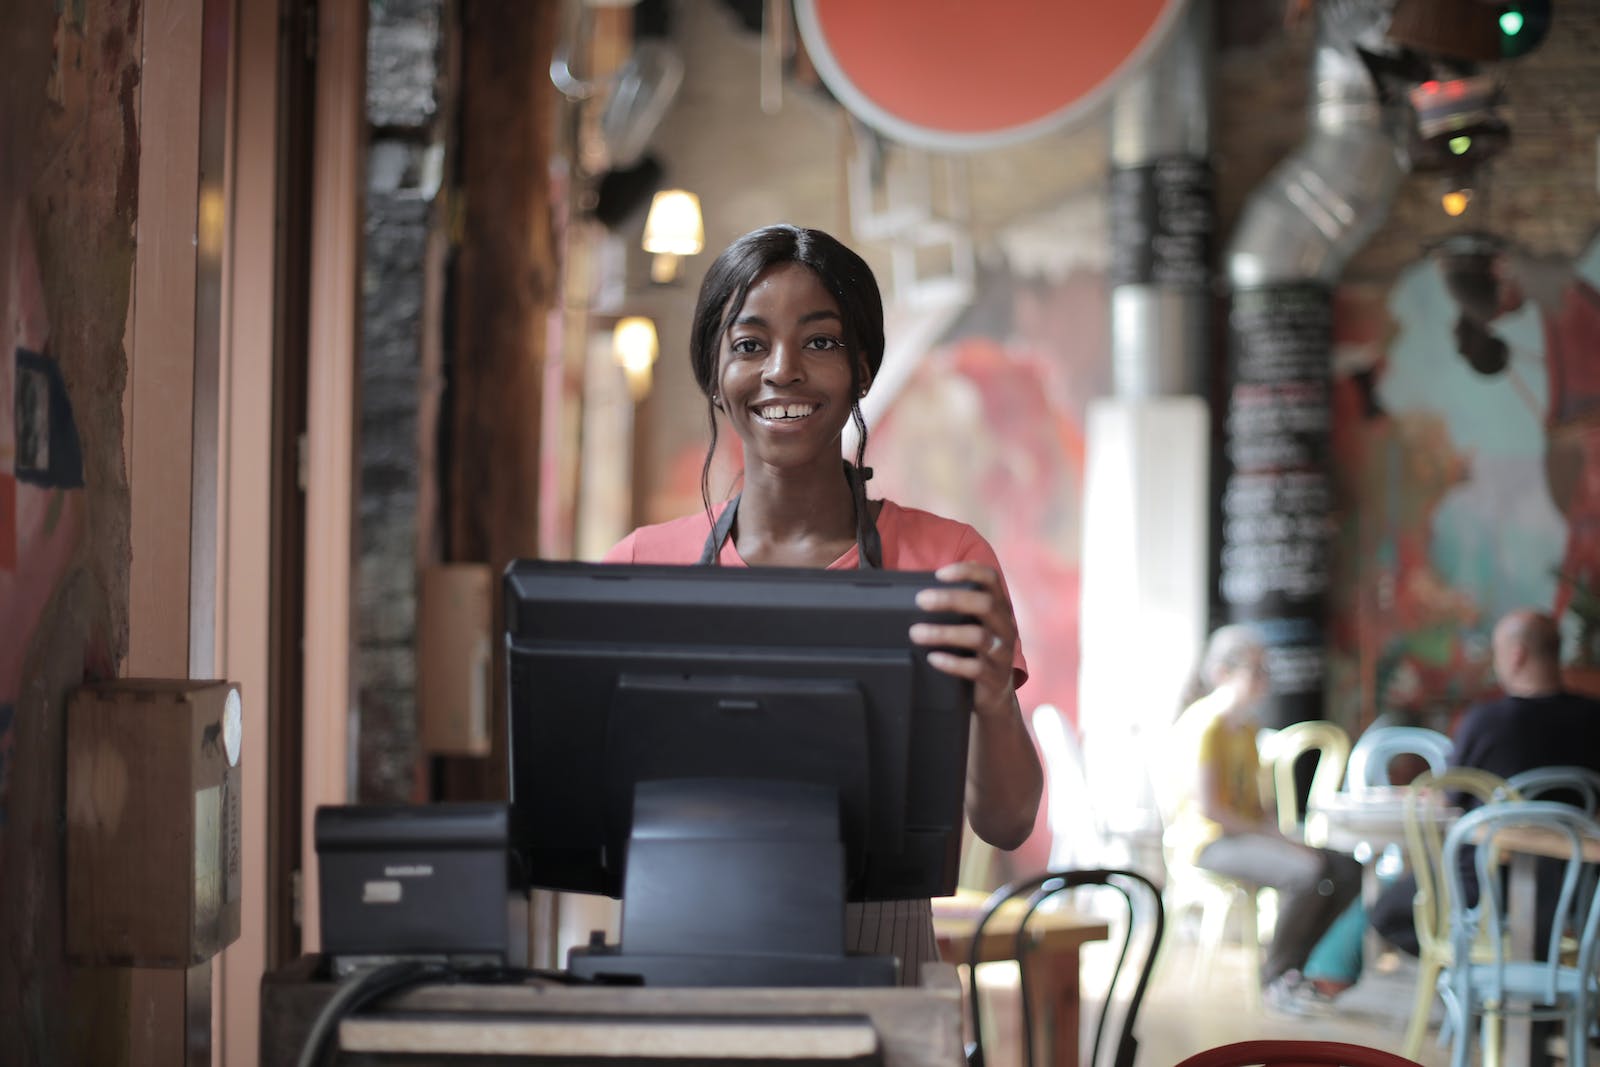 Positive young woman in uniform smiling while standing at counter desk in cafe